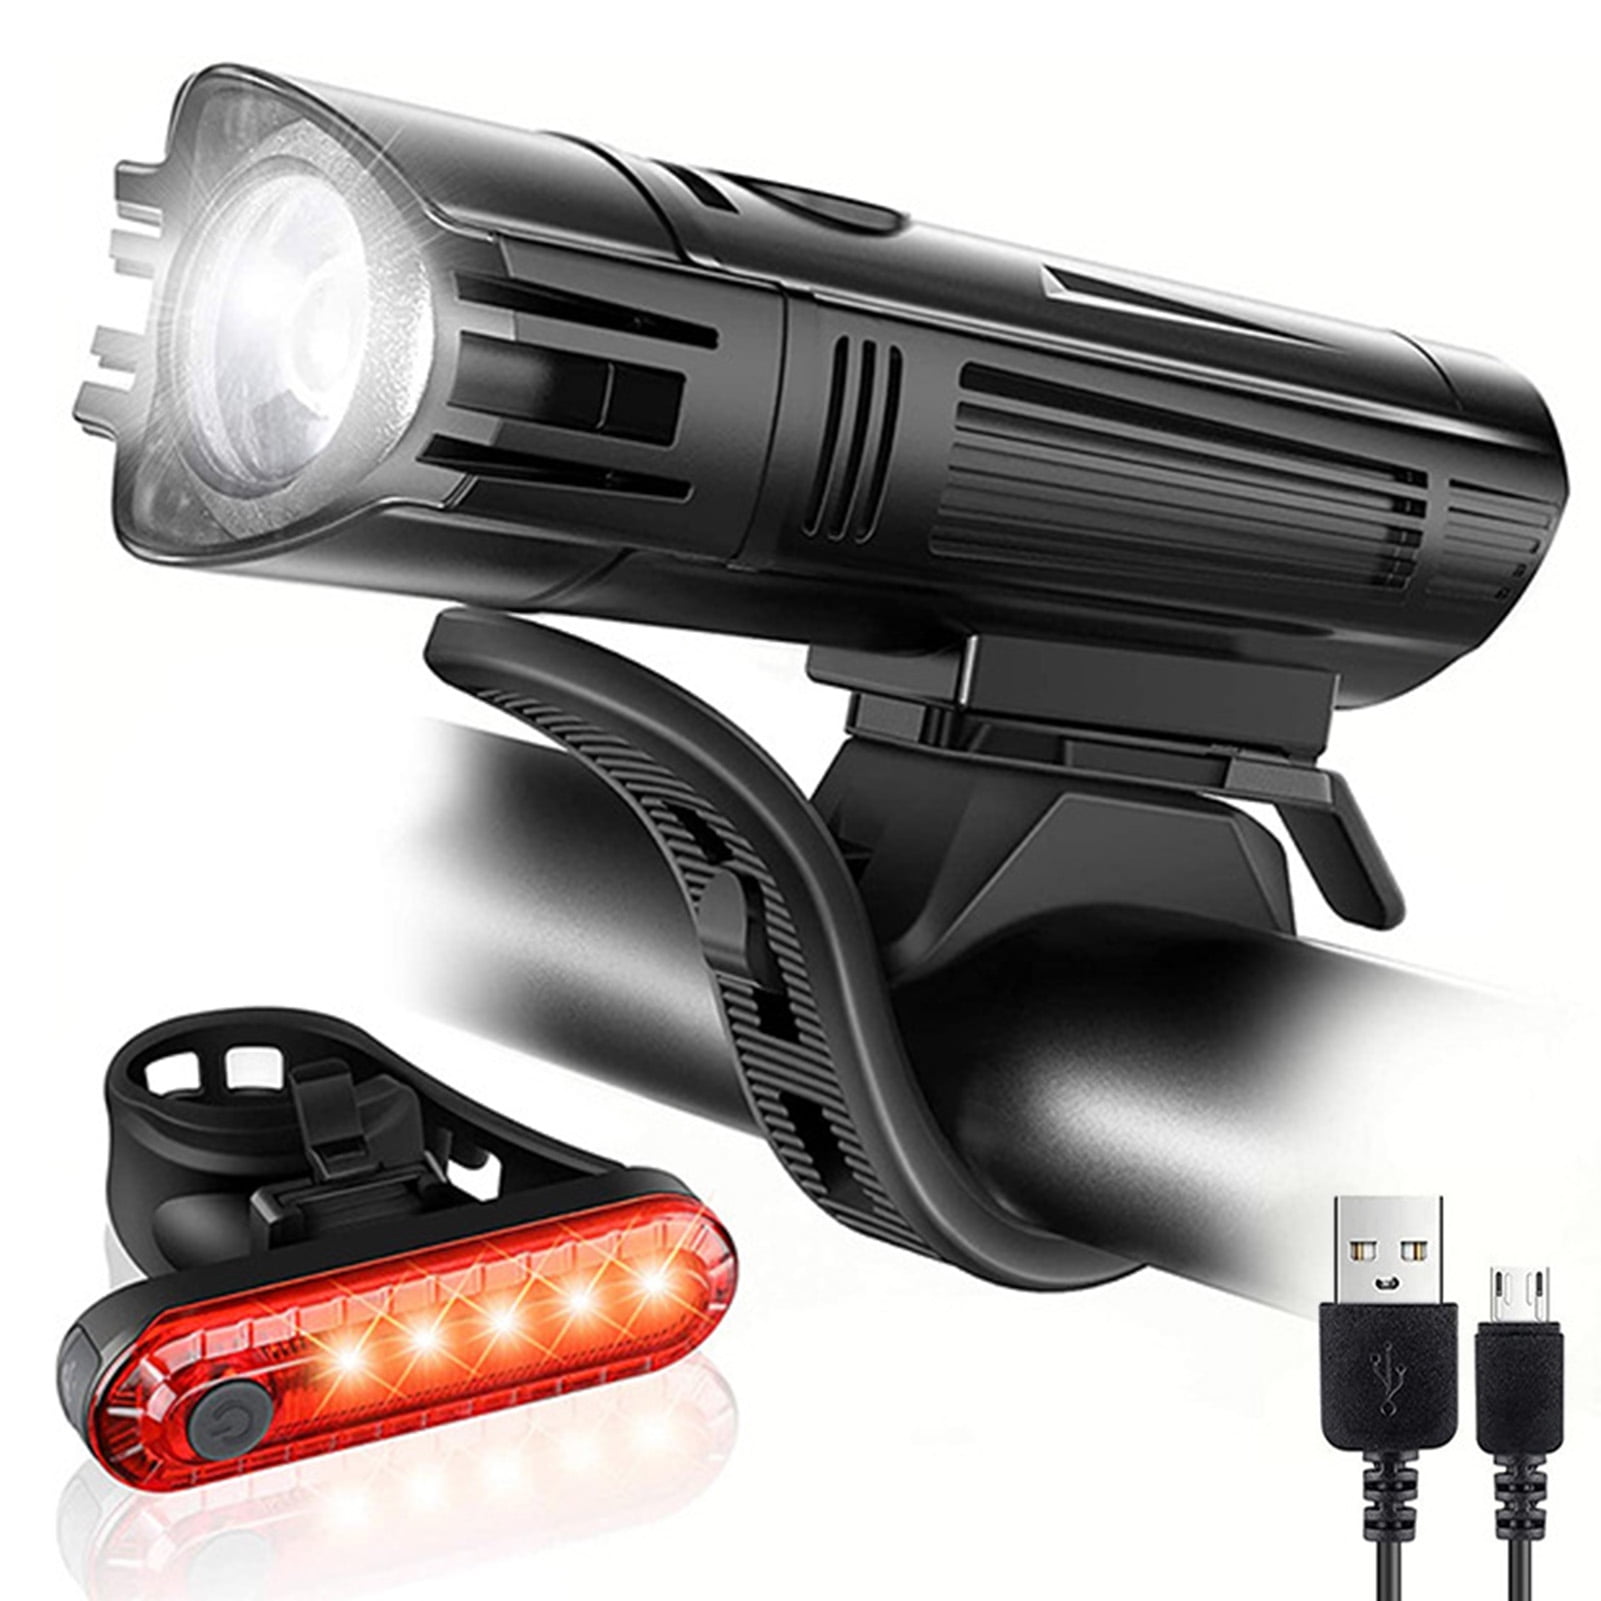 Details about   USB Bike Light Rechargeable Handlebar Headlight Front LED Lamp Built-in Battery 